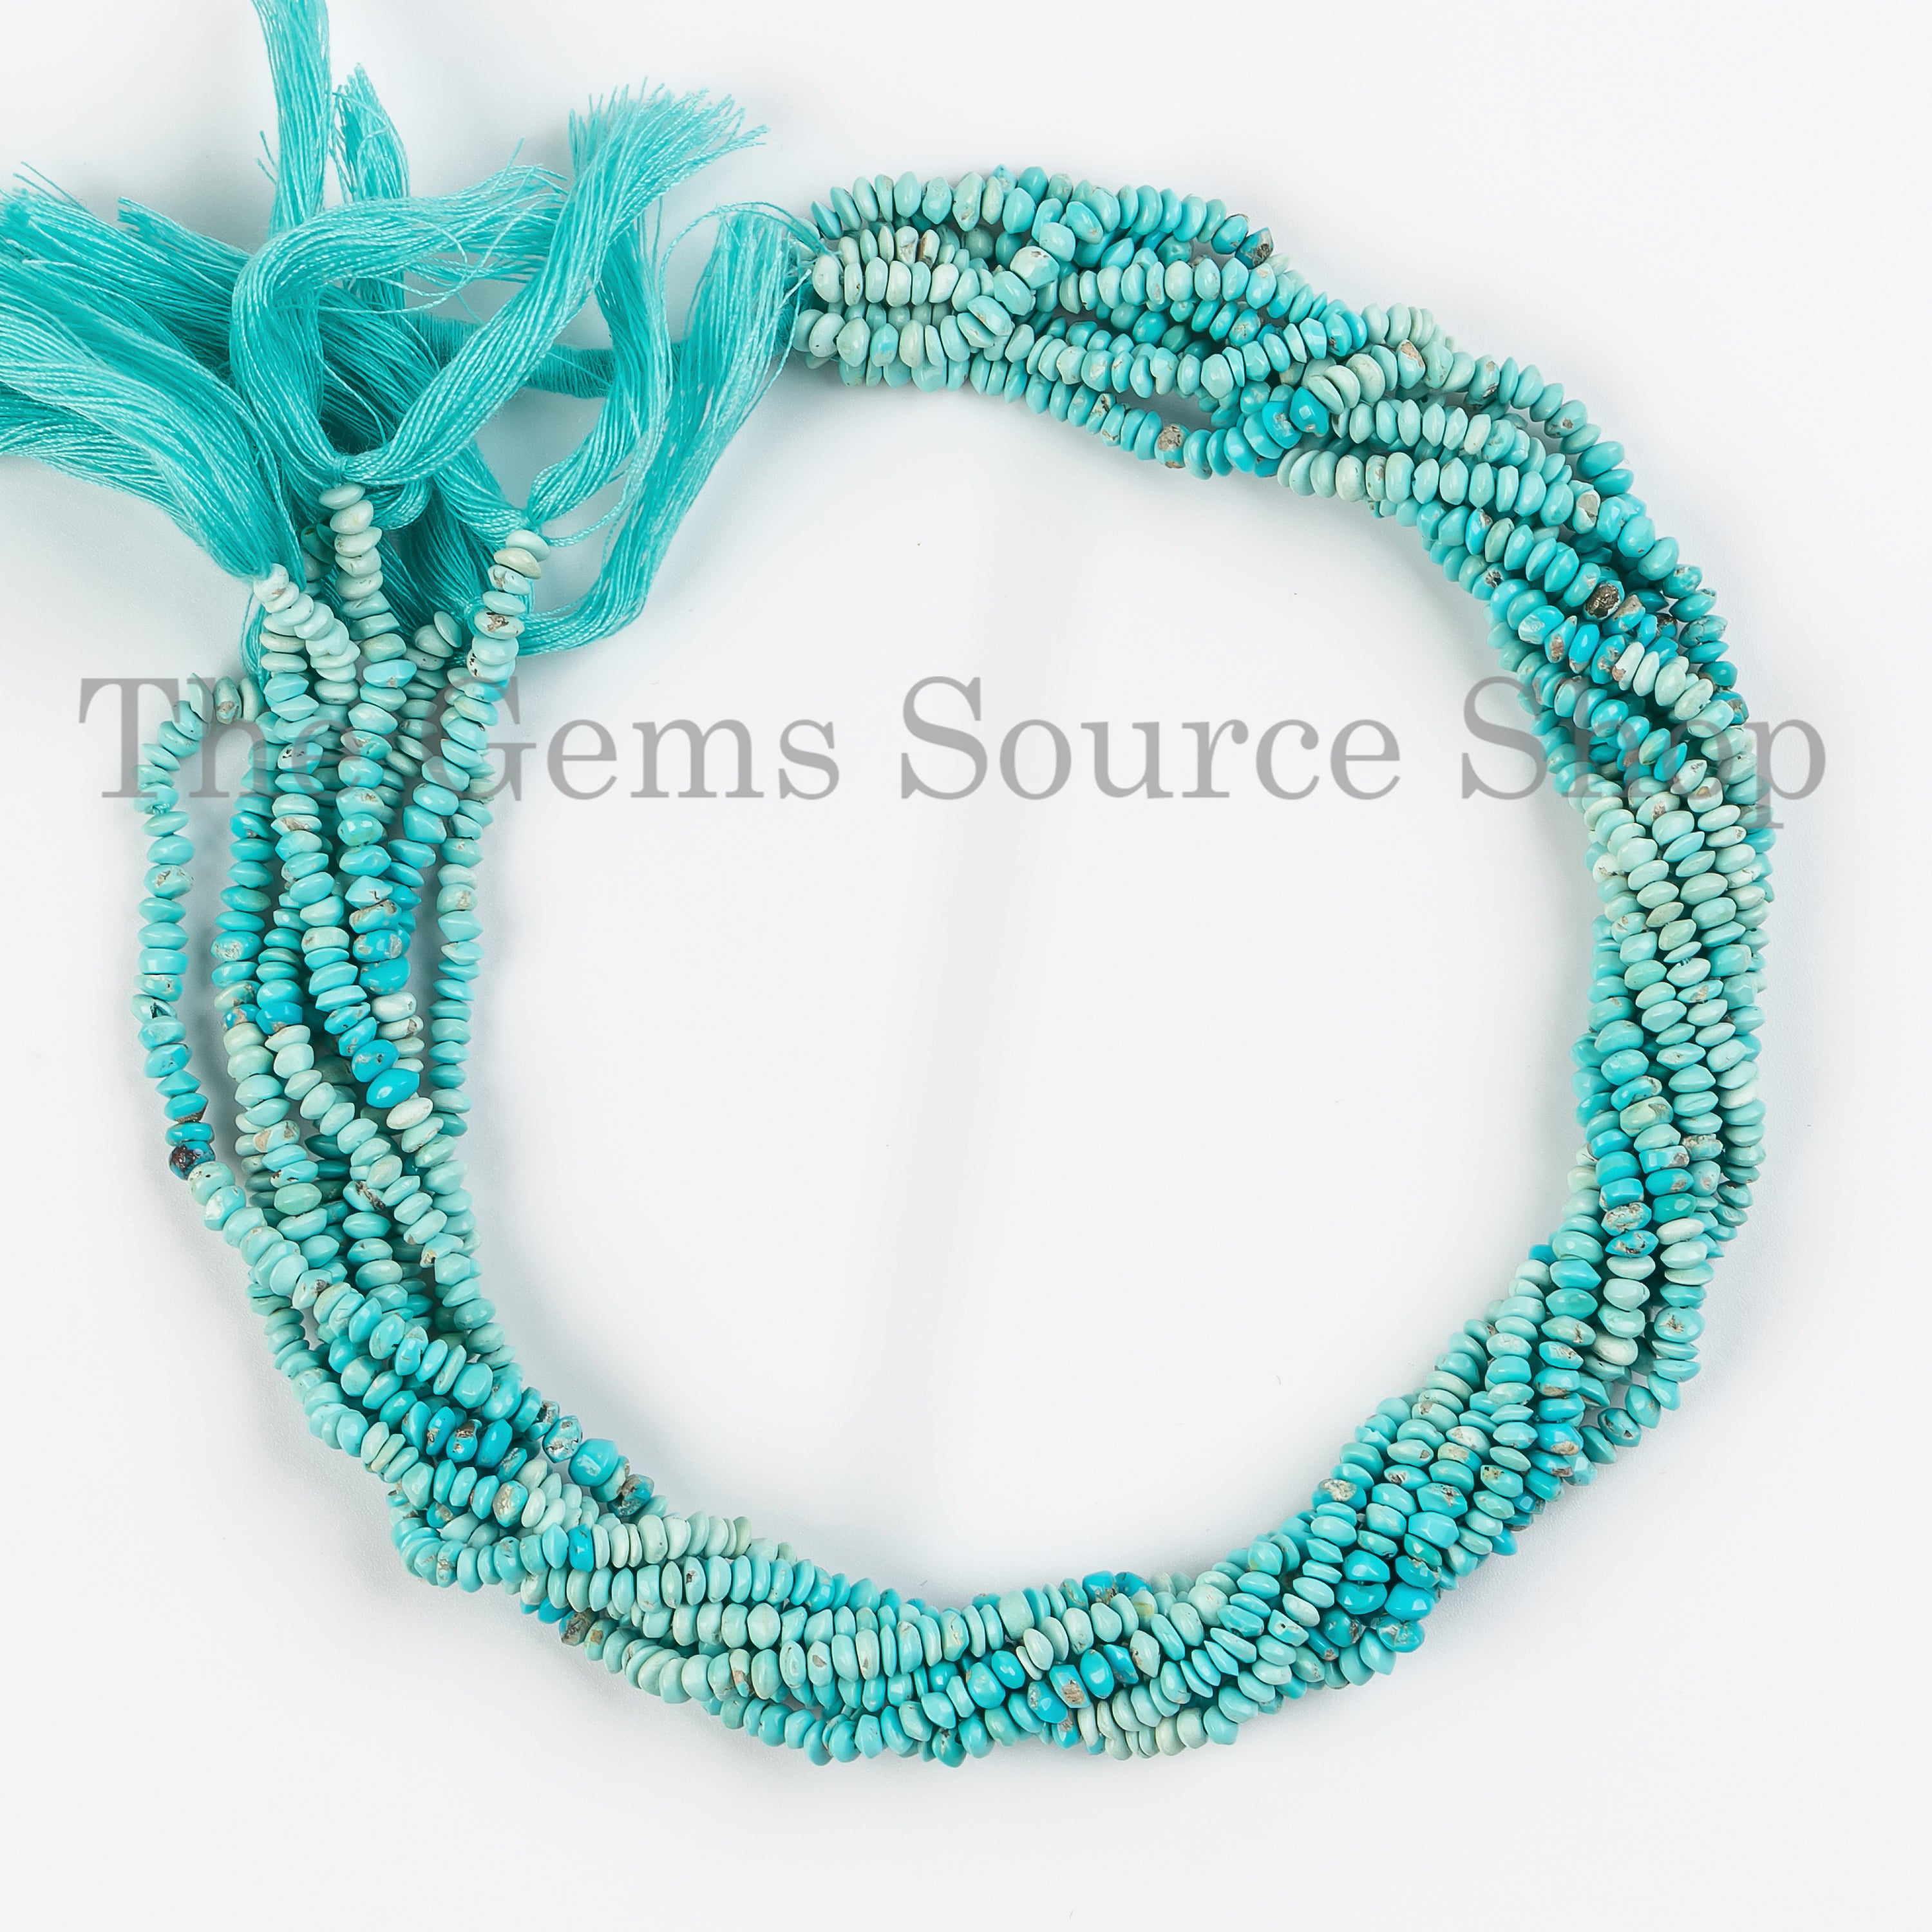 Natural Turquoise Beads, Turquoise Smooth Beads, Turquoise Button Shape Beads, Wholesale Beads